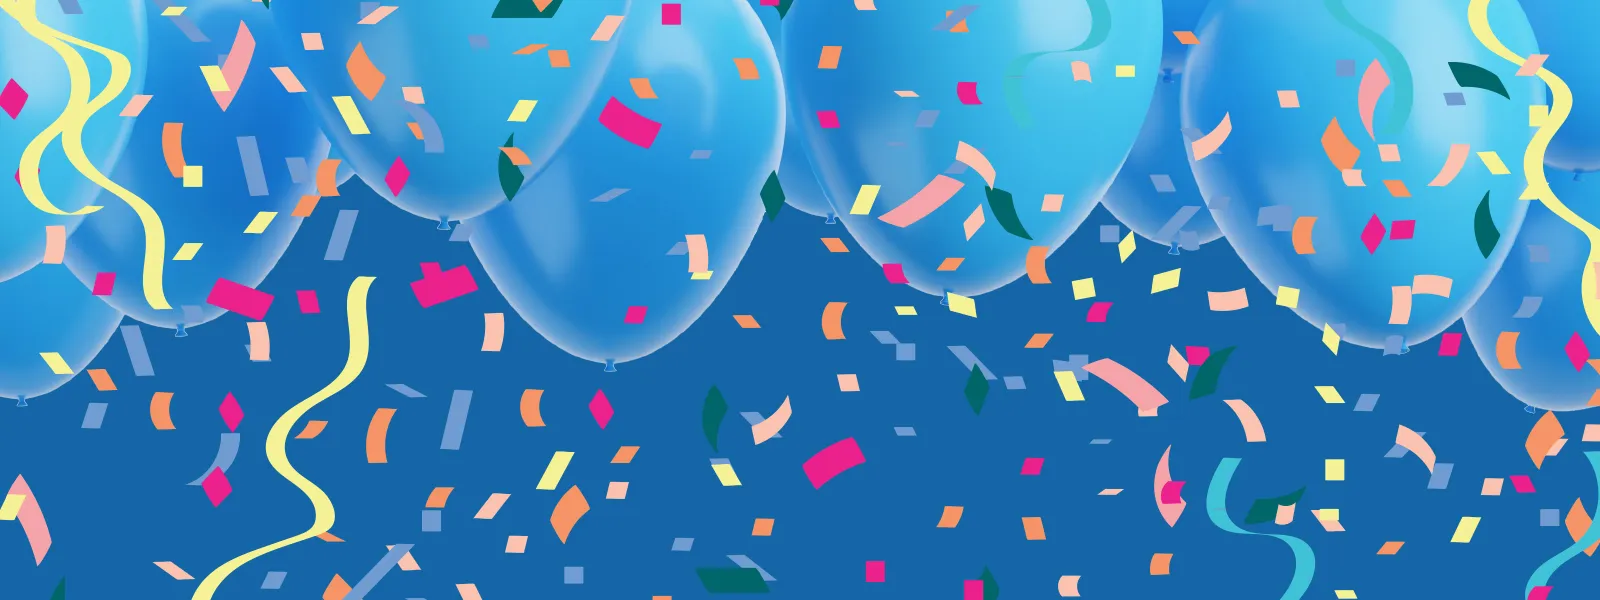 Illustration showing balloons and confetti